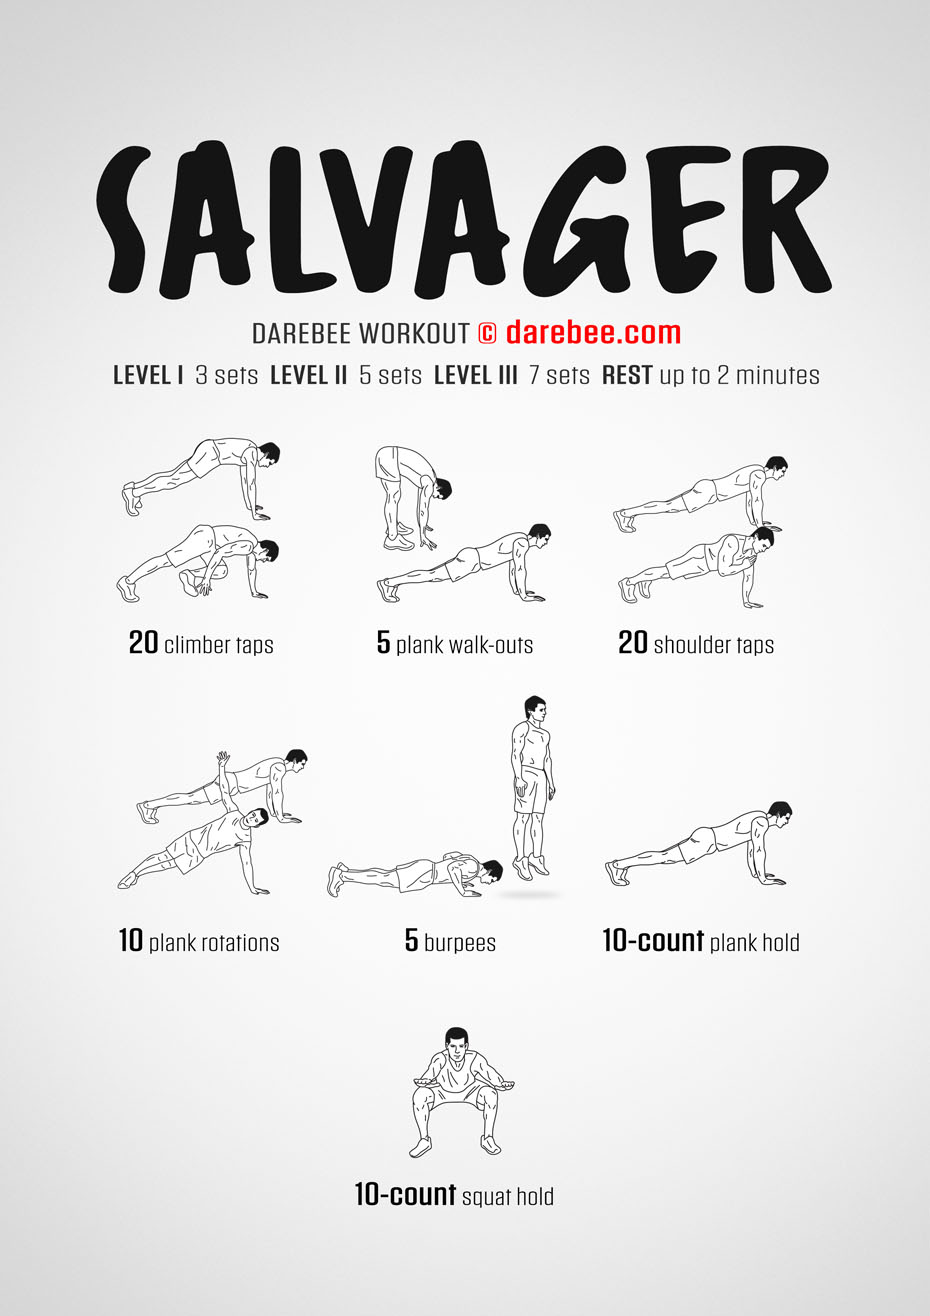 6-Pack Workout - Challenge Upper, Lower And Side Abs - GymGuider